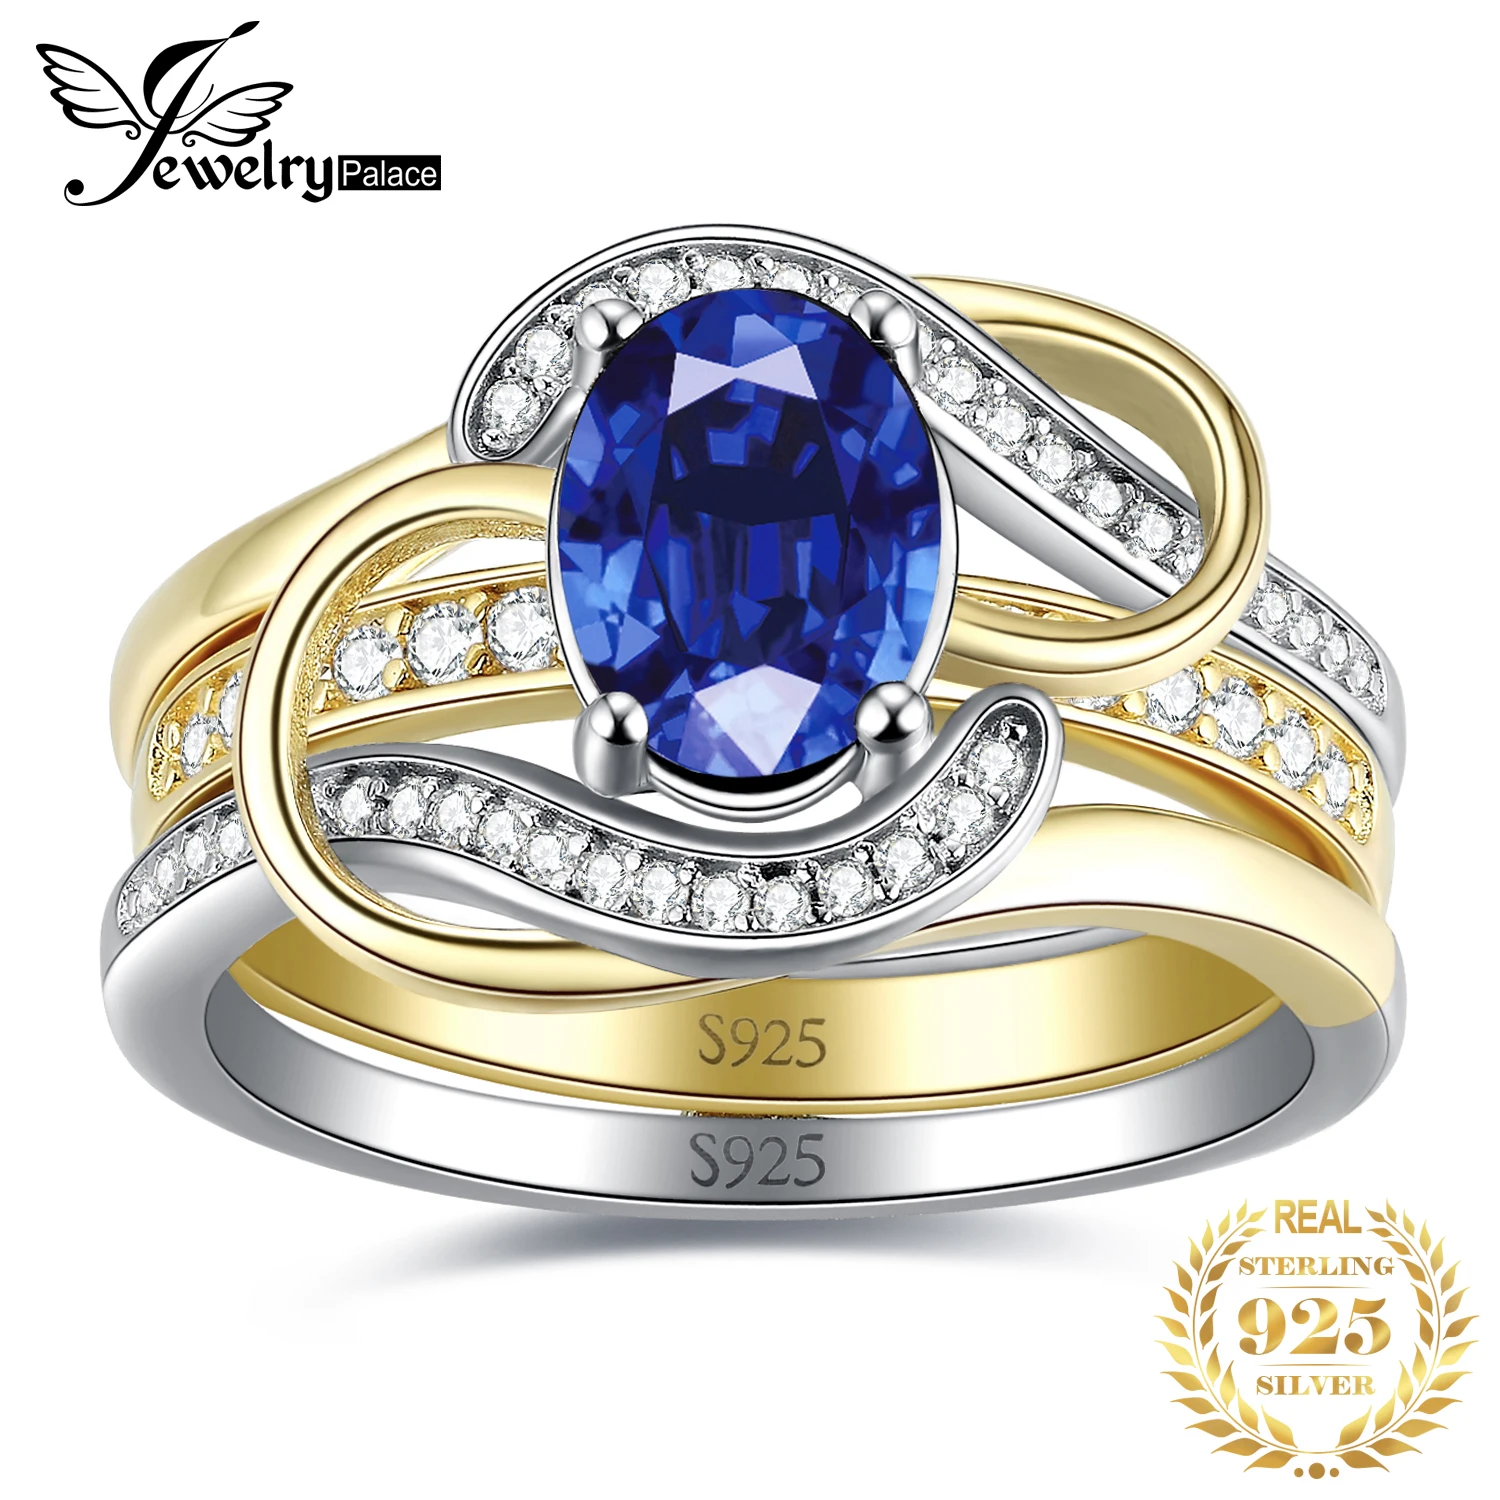 

JewelryPalace New 2Pcs 925 Sterling Silver Wedding Engagement Ring for Woman 2ct Oval Created Blue Sapphire Luxury Bridal Sets